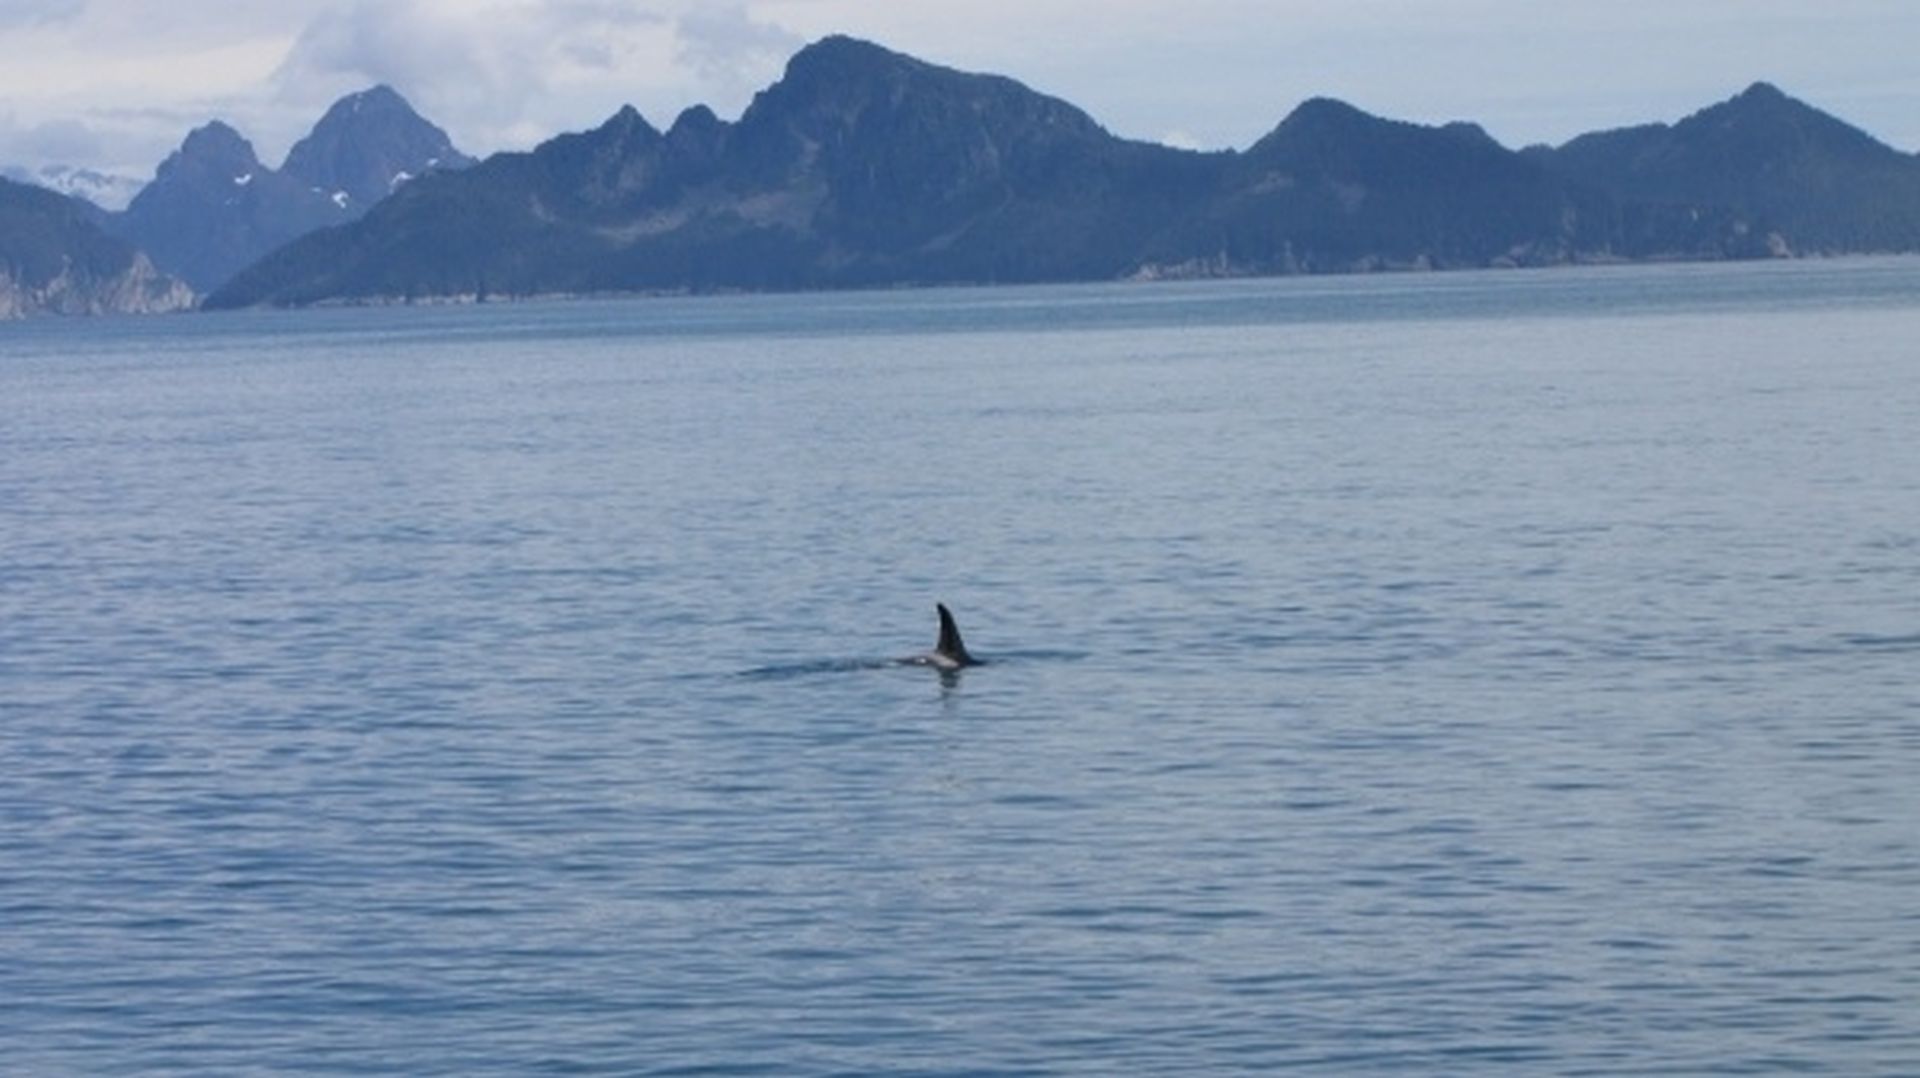 Seward Glacier Cruise - ITS AN ORCA (ok, small I know but it really is)